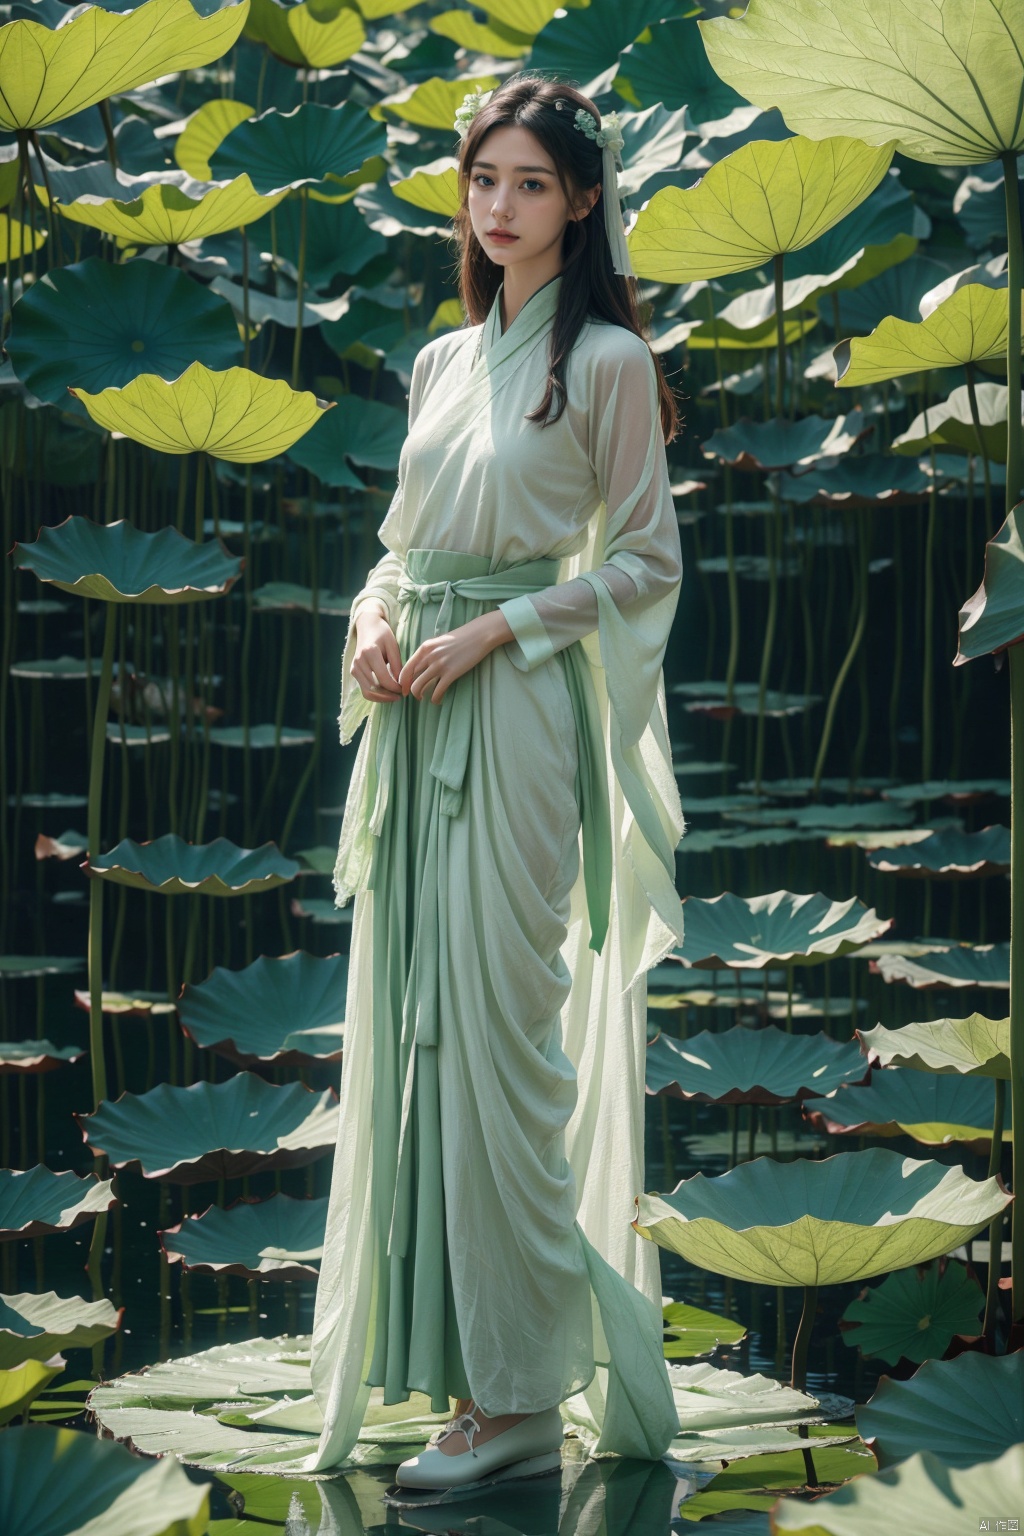 1 girl, long legs, Hanfu fashion, whole body, standing in giant lotus leaves, long white headband, wearing white fairy gauze skirt, wearing antique white cloth shoes, 8k,RAW photo, best quality, masterpiece :1.2), (realistic, photo realistic :1.37), (green theme :1.2), creative, perfect, beautifully composed, intricate, nuanced
Light and shadow, atmosphere, detail, visual appeal, lotus leaf